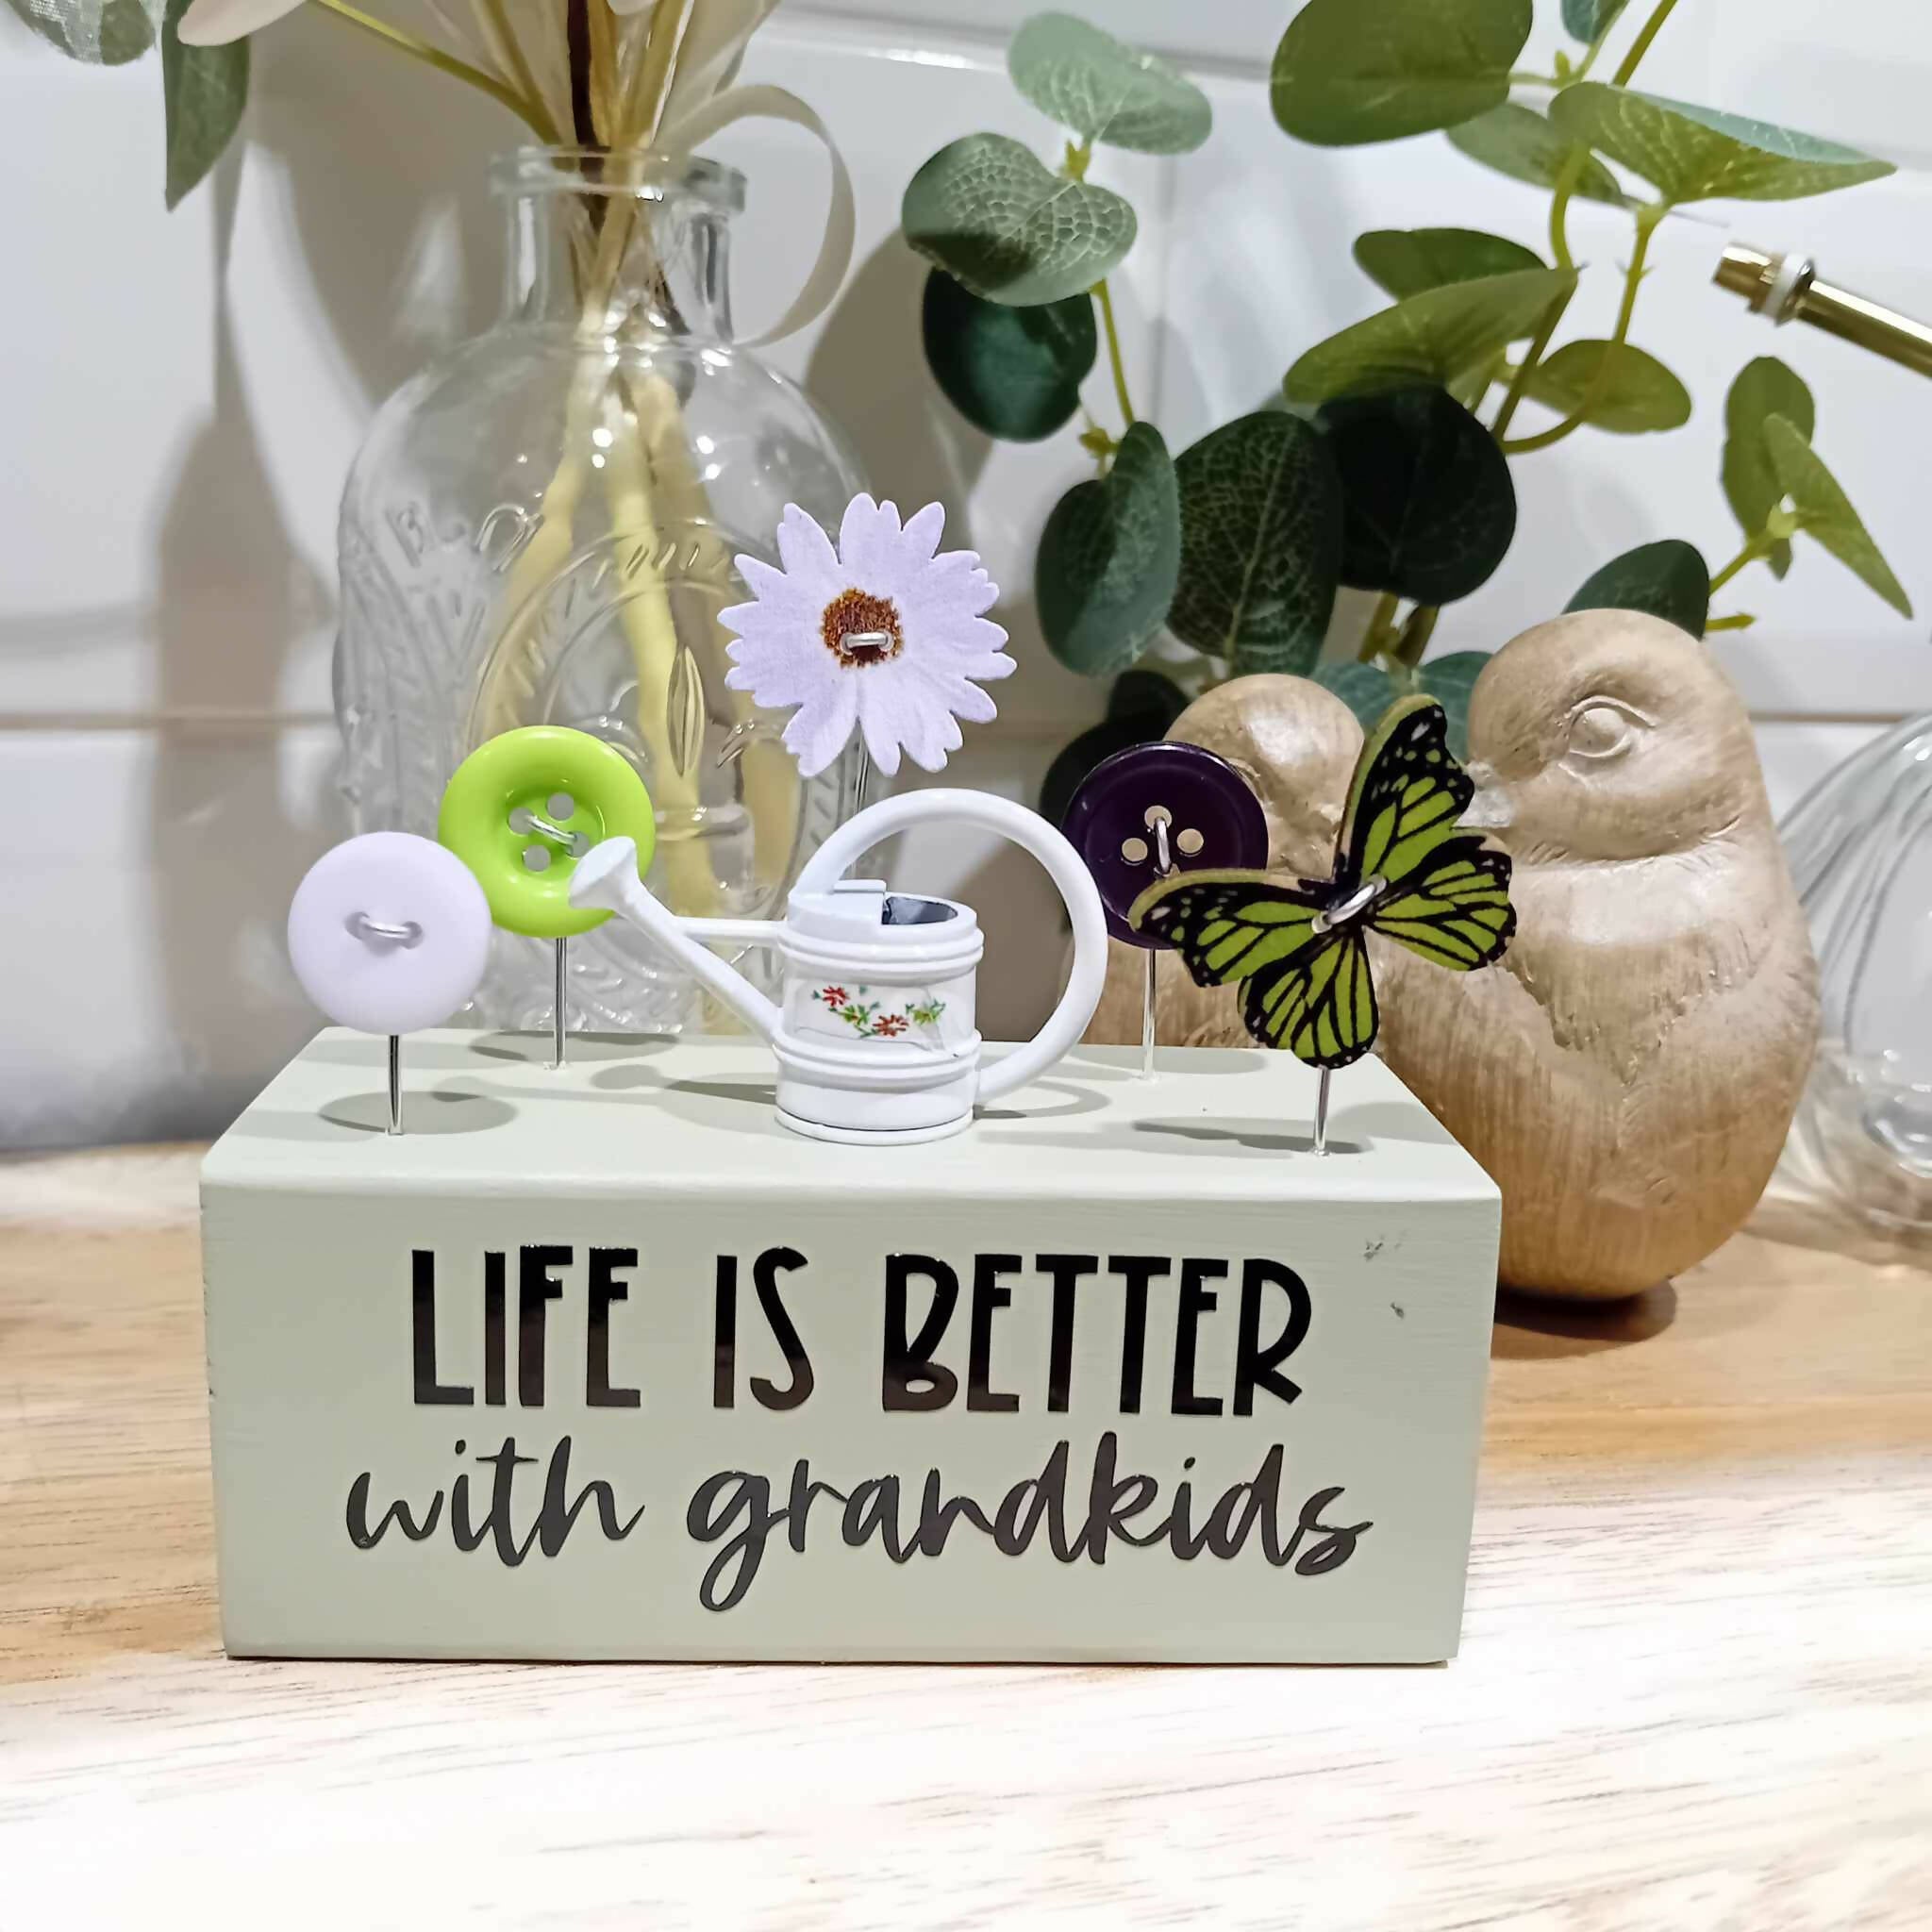 Life is better with grandkids lime button art gift